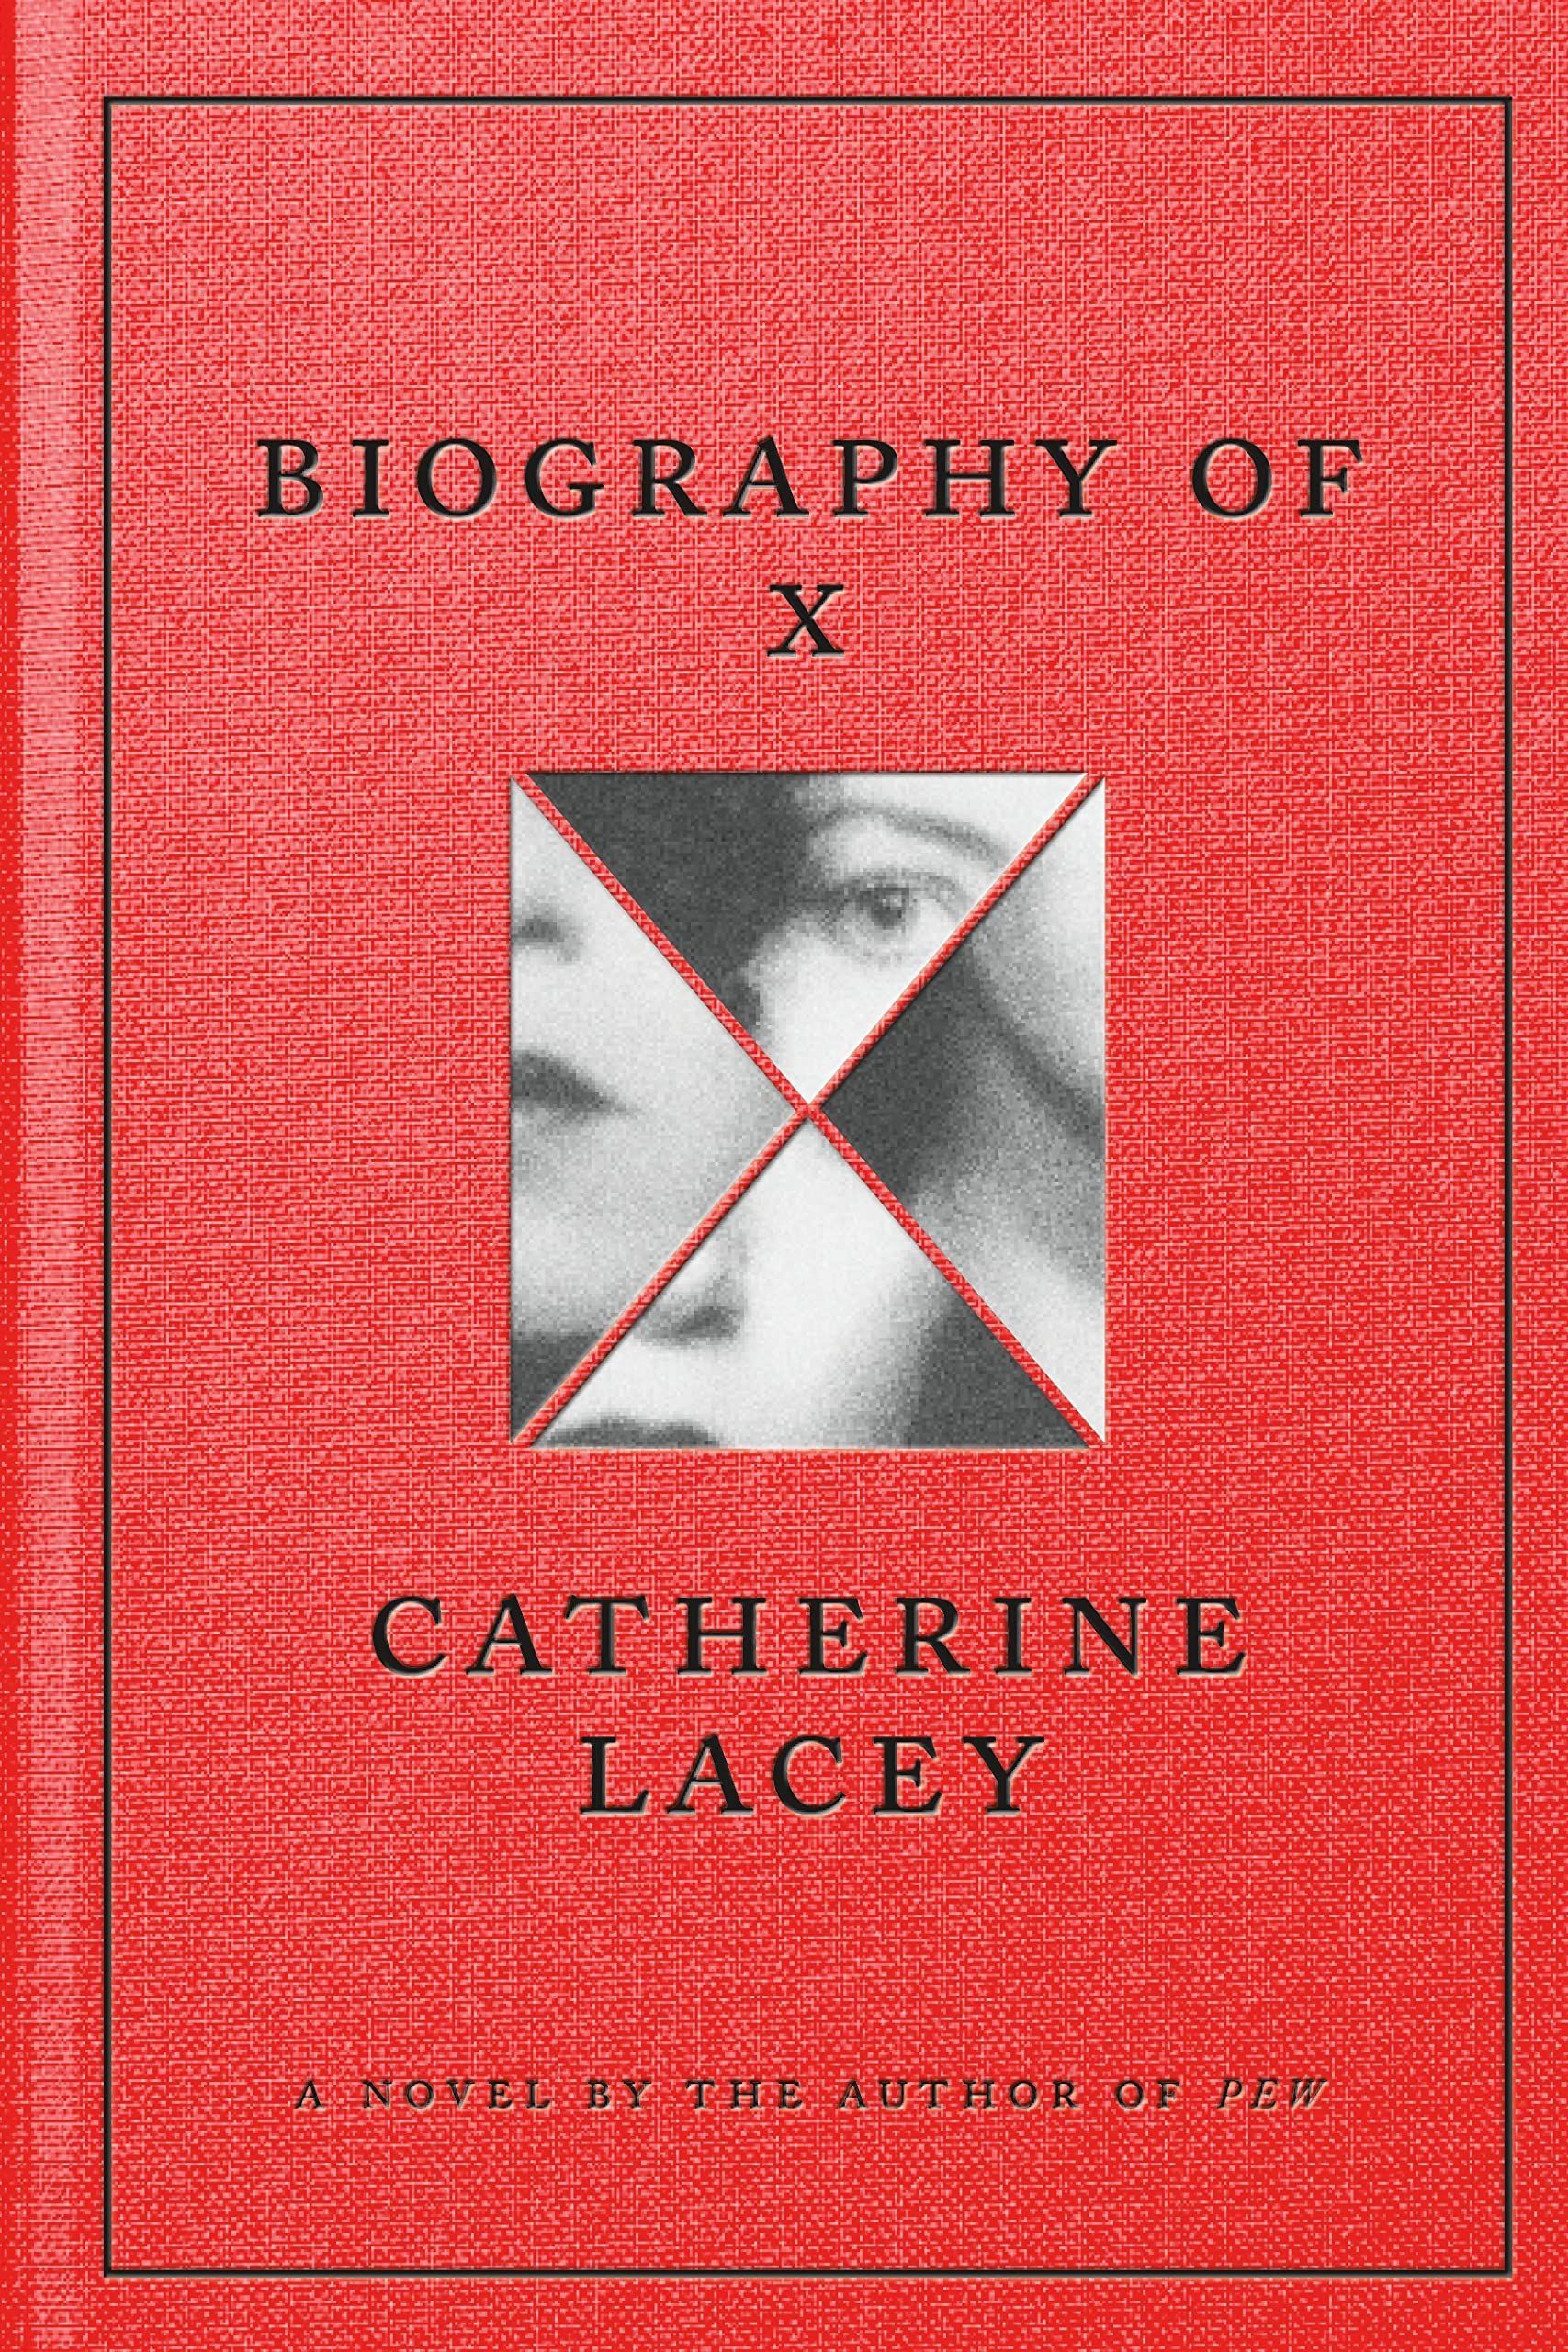 Sincerely Paranoid: On Catherine Lacey’s “Biography of X”